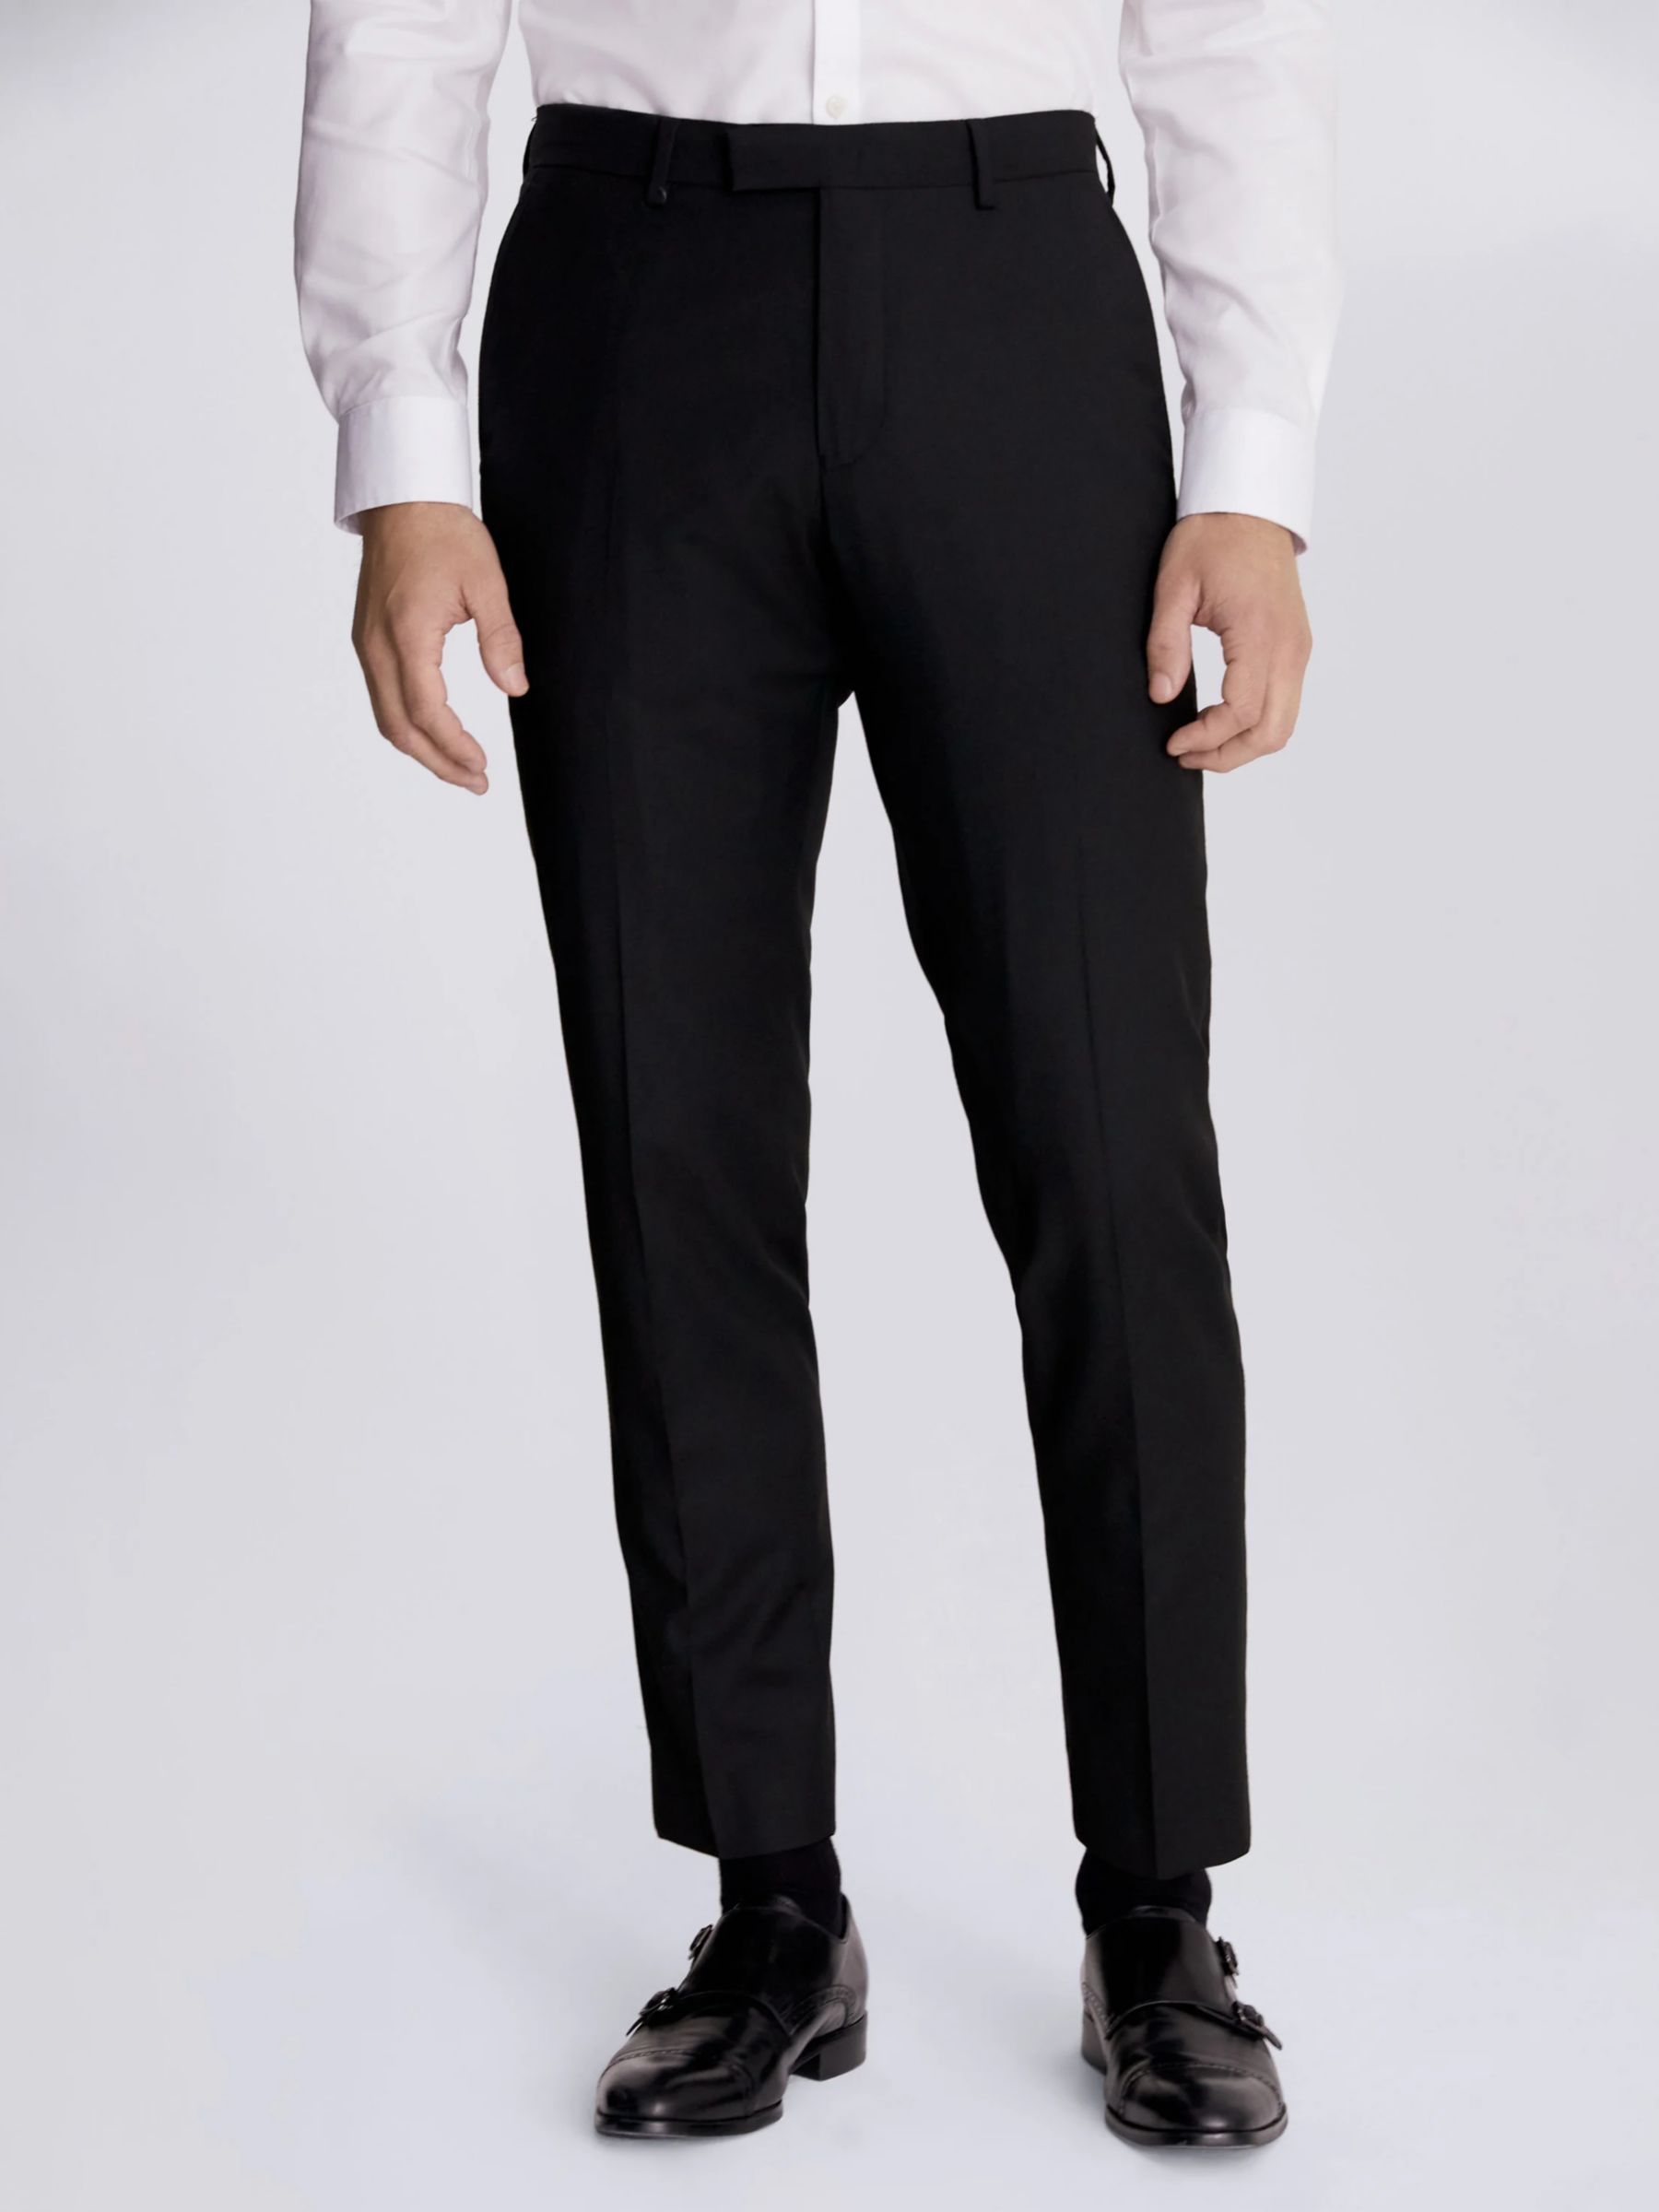 Moss Slim Fit Stretch Trousers, Black at John Lewis & Partners